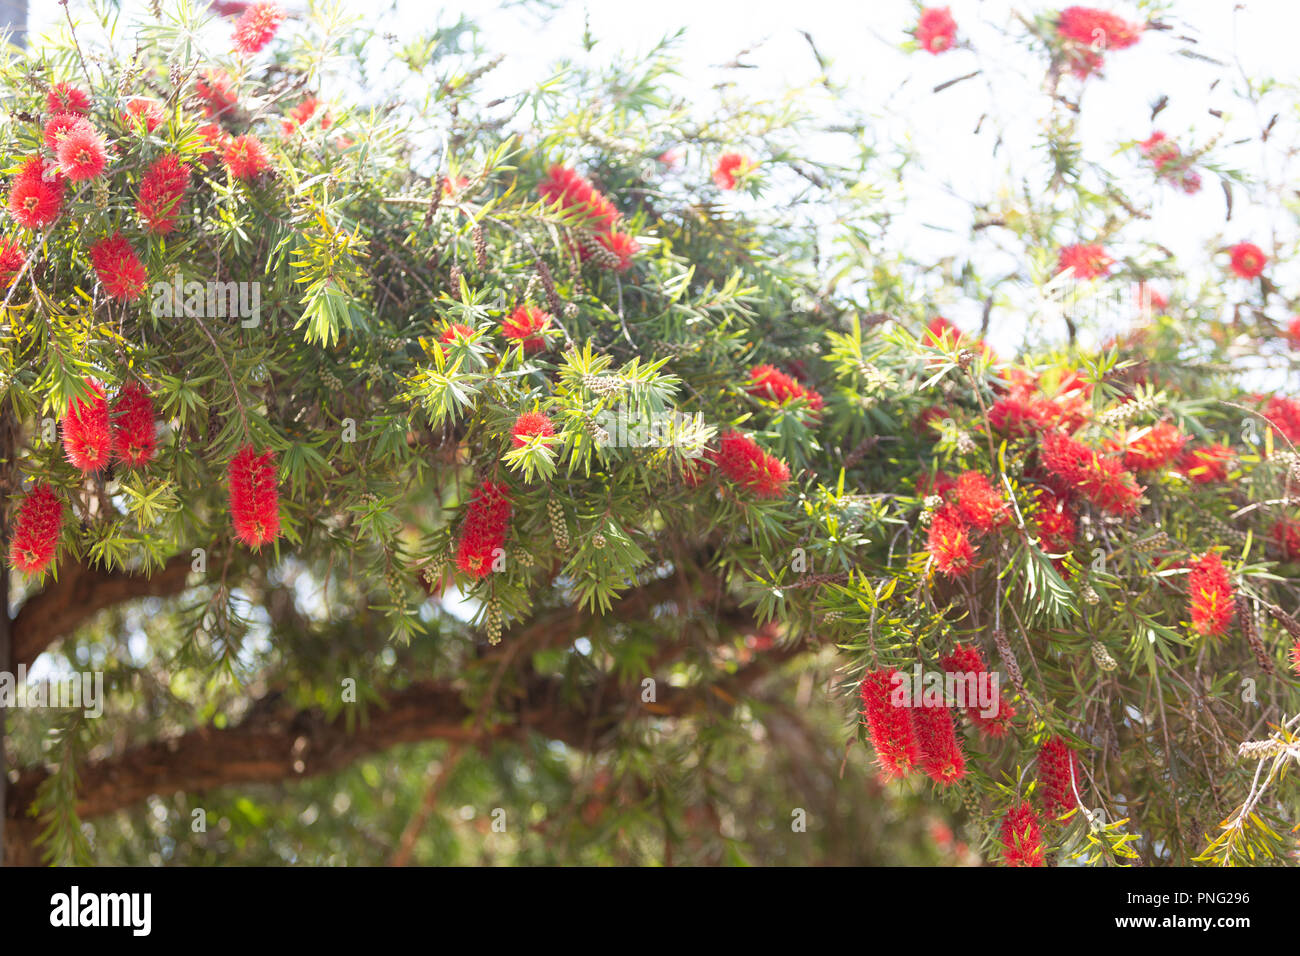 Asuncion, Paraguay. 21st Sep, 2018. A warm sunny day in Asuncion with temperatures high around 31°C as weeping bottlebrush (Melaleuca viminalis) flowers in bloom sign the arrival of spring season. The spring equinox takes place tomorrow in Paraguay. Credit: Andre M. Chang/ARDUOPRESS/Alamy Live News Stock Photo